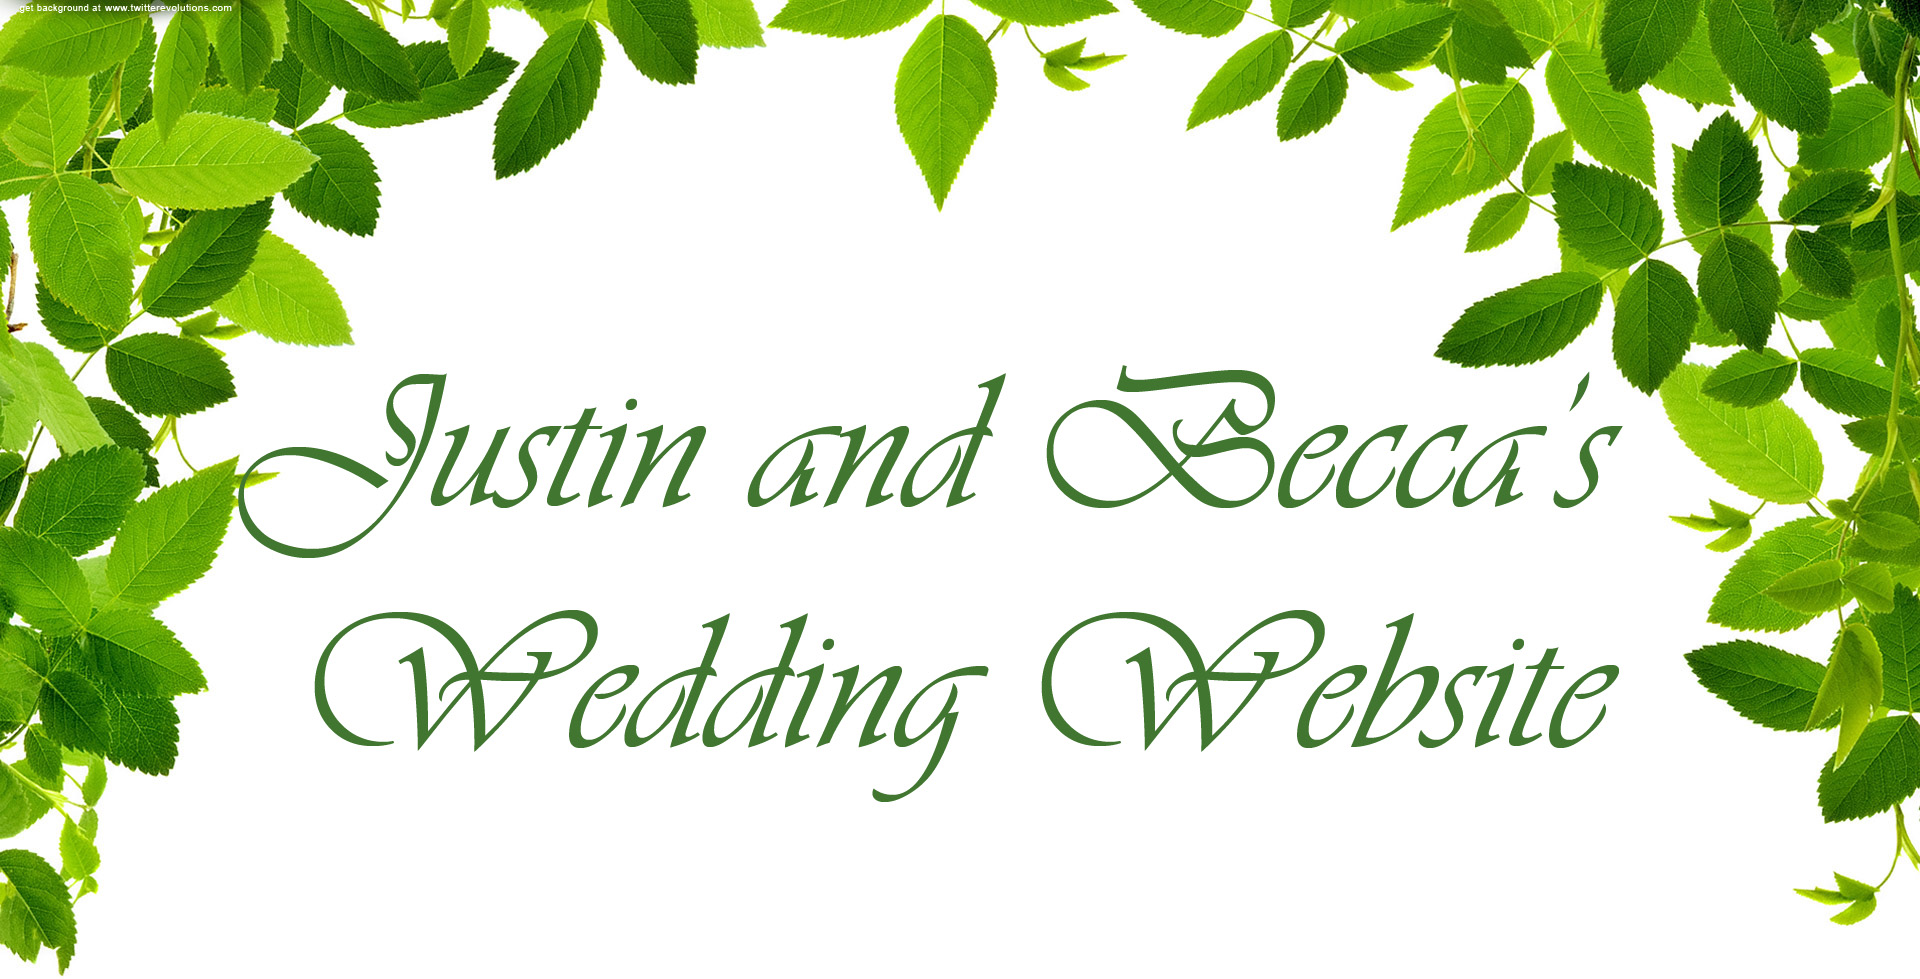 Justin and Becca's Wedding Website